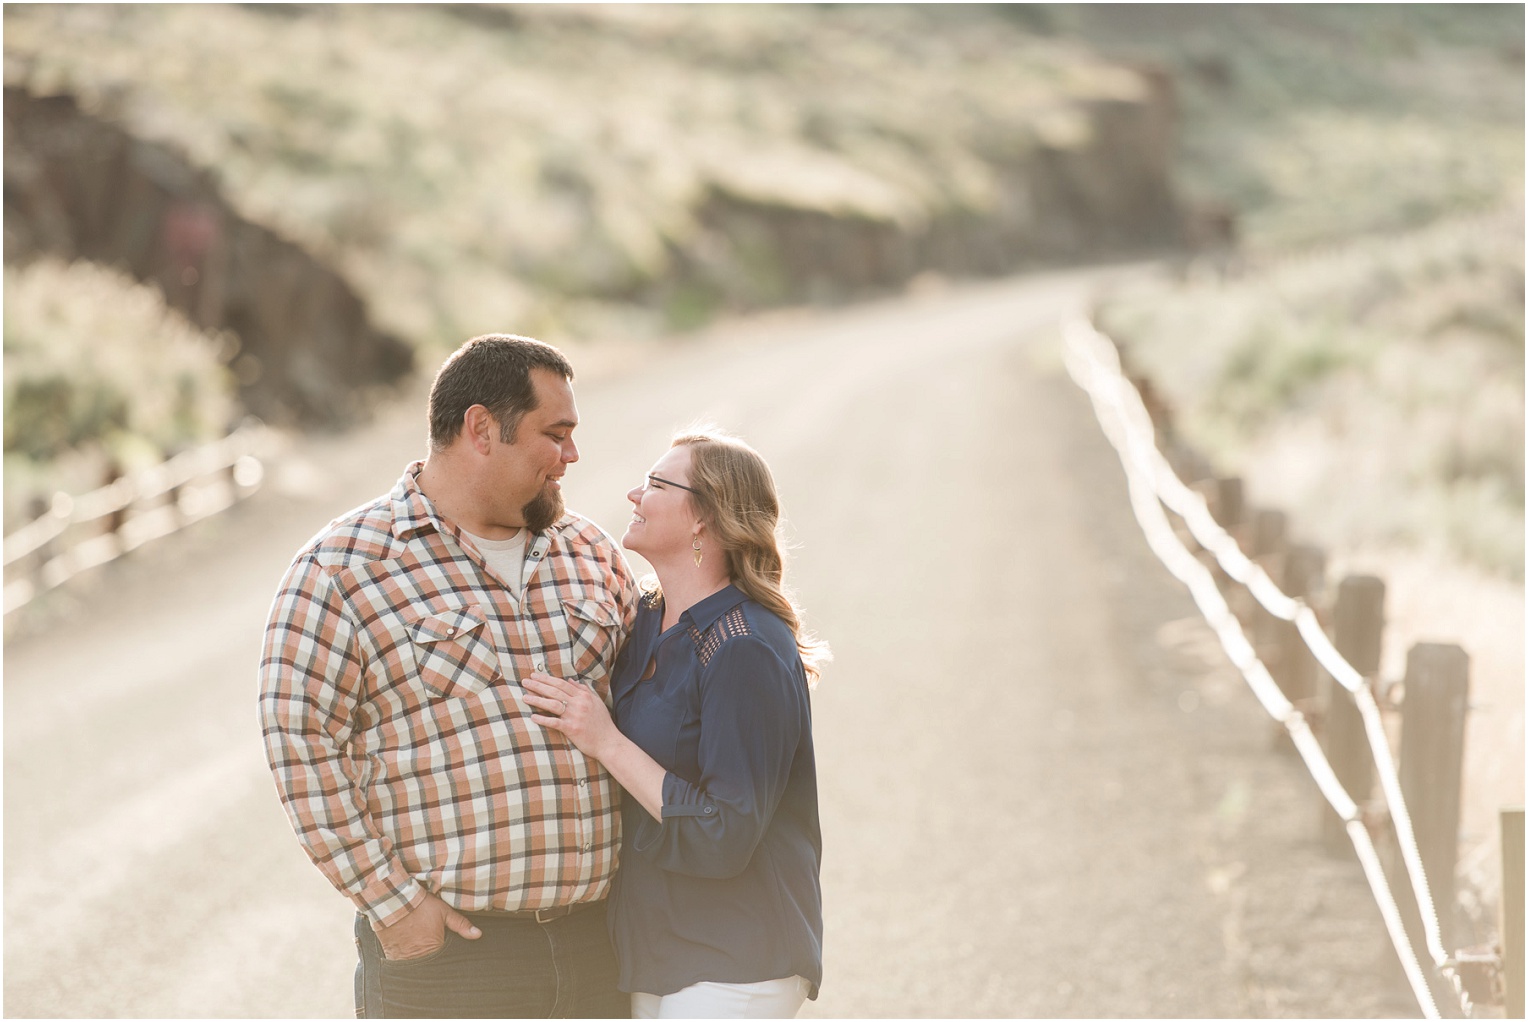 Vantage Crags Engagement Session Couple standing in roadway